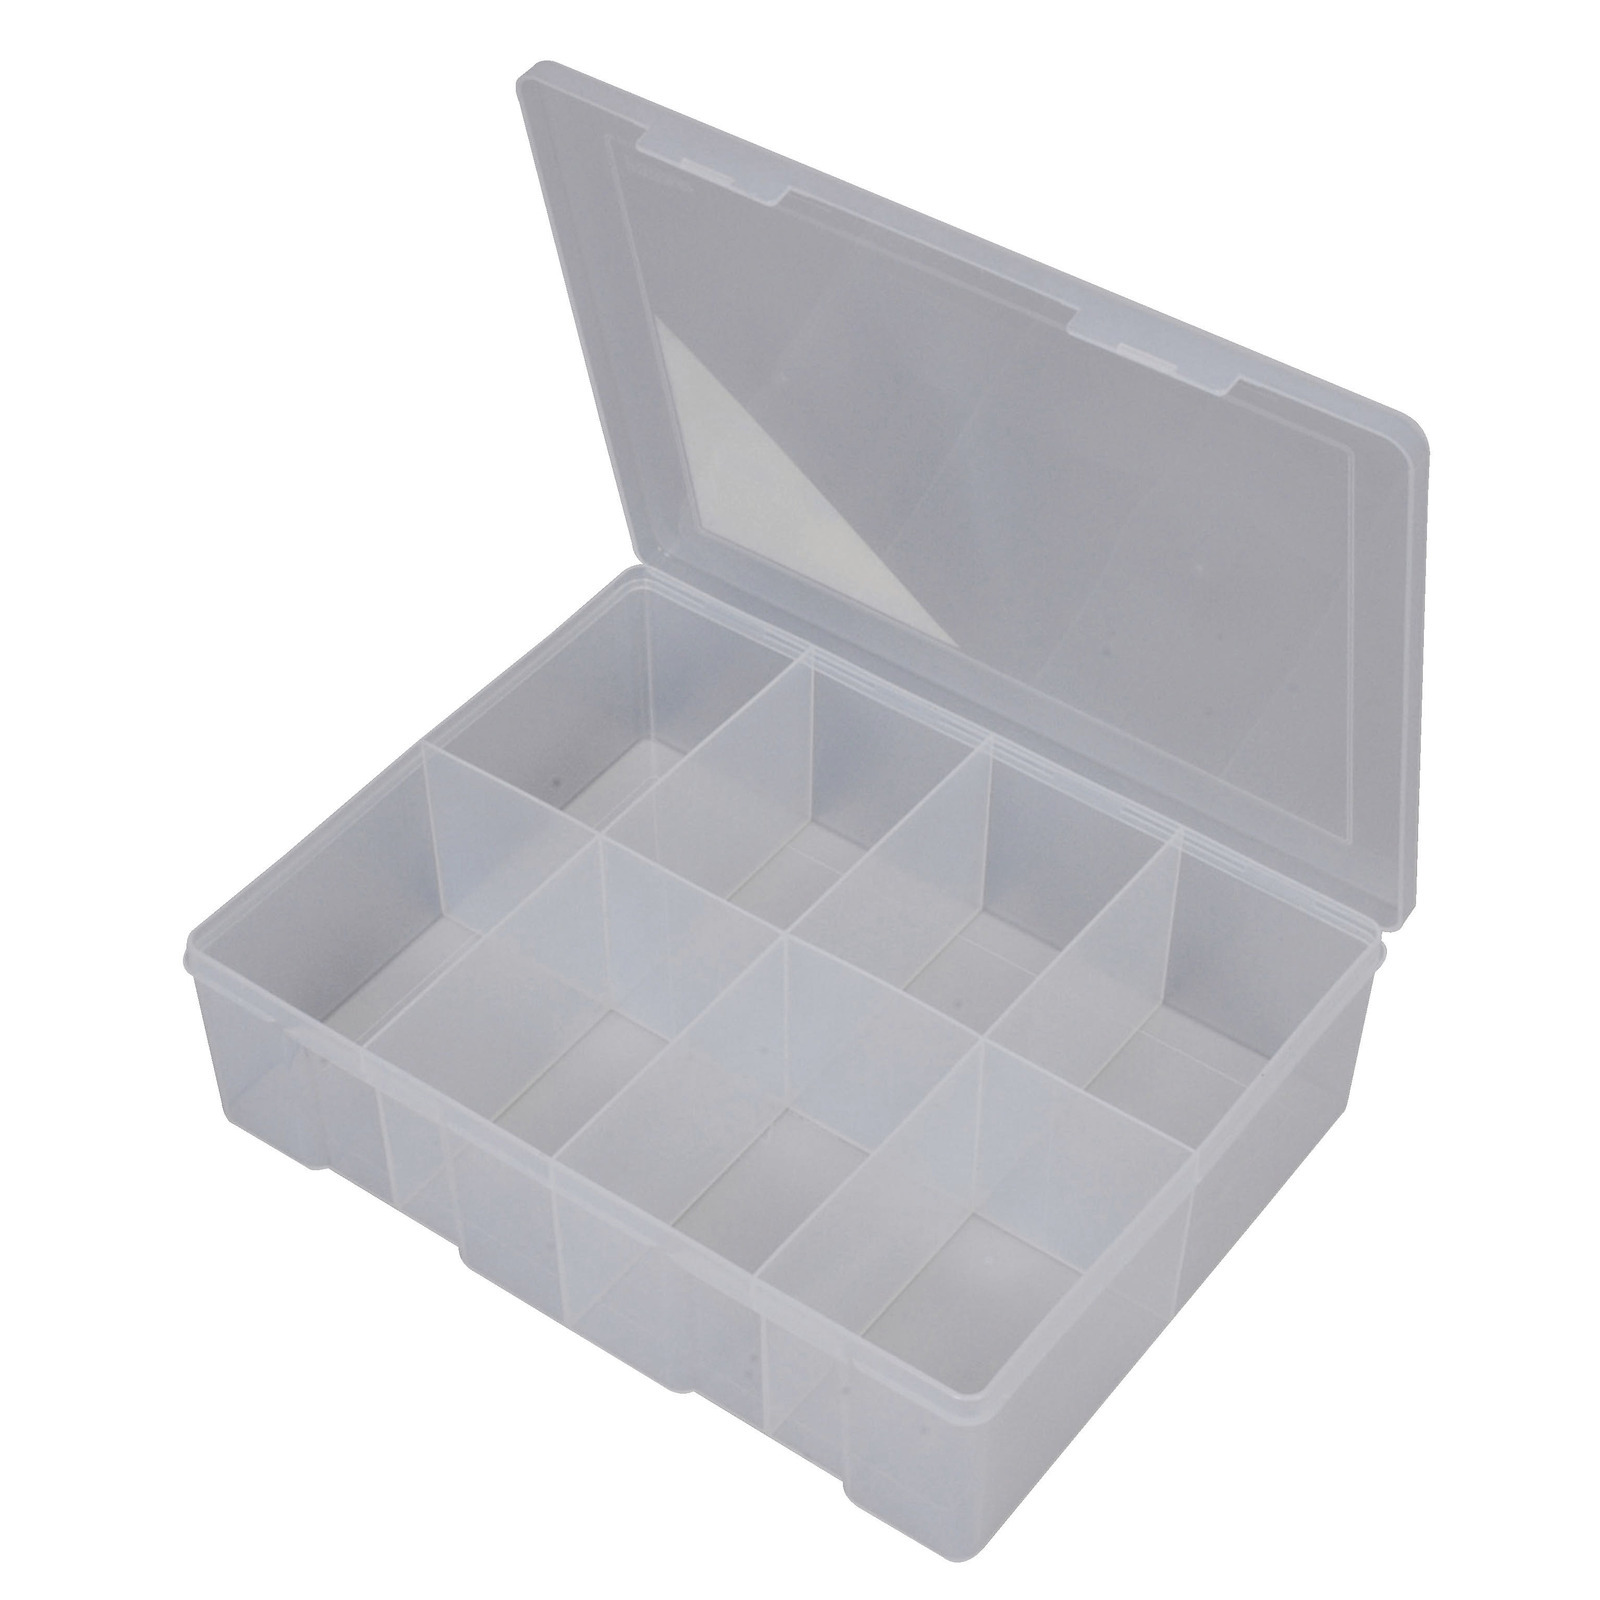 Accessory Boxes - Extra Large Extra Deep (8 compartment)